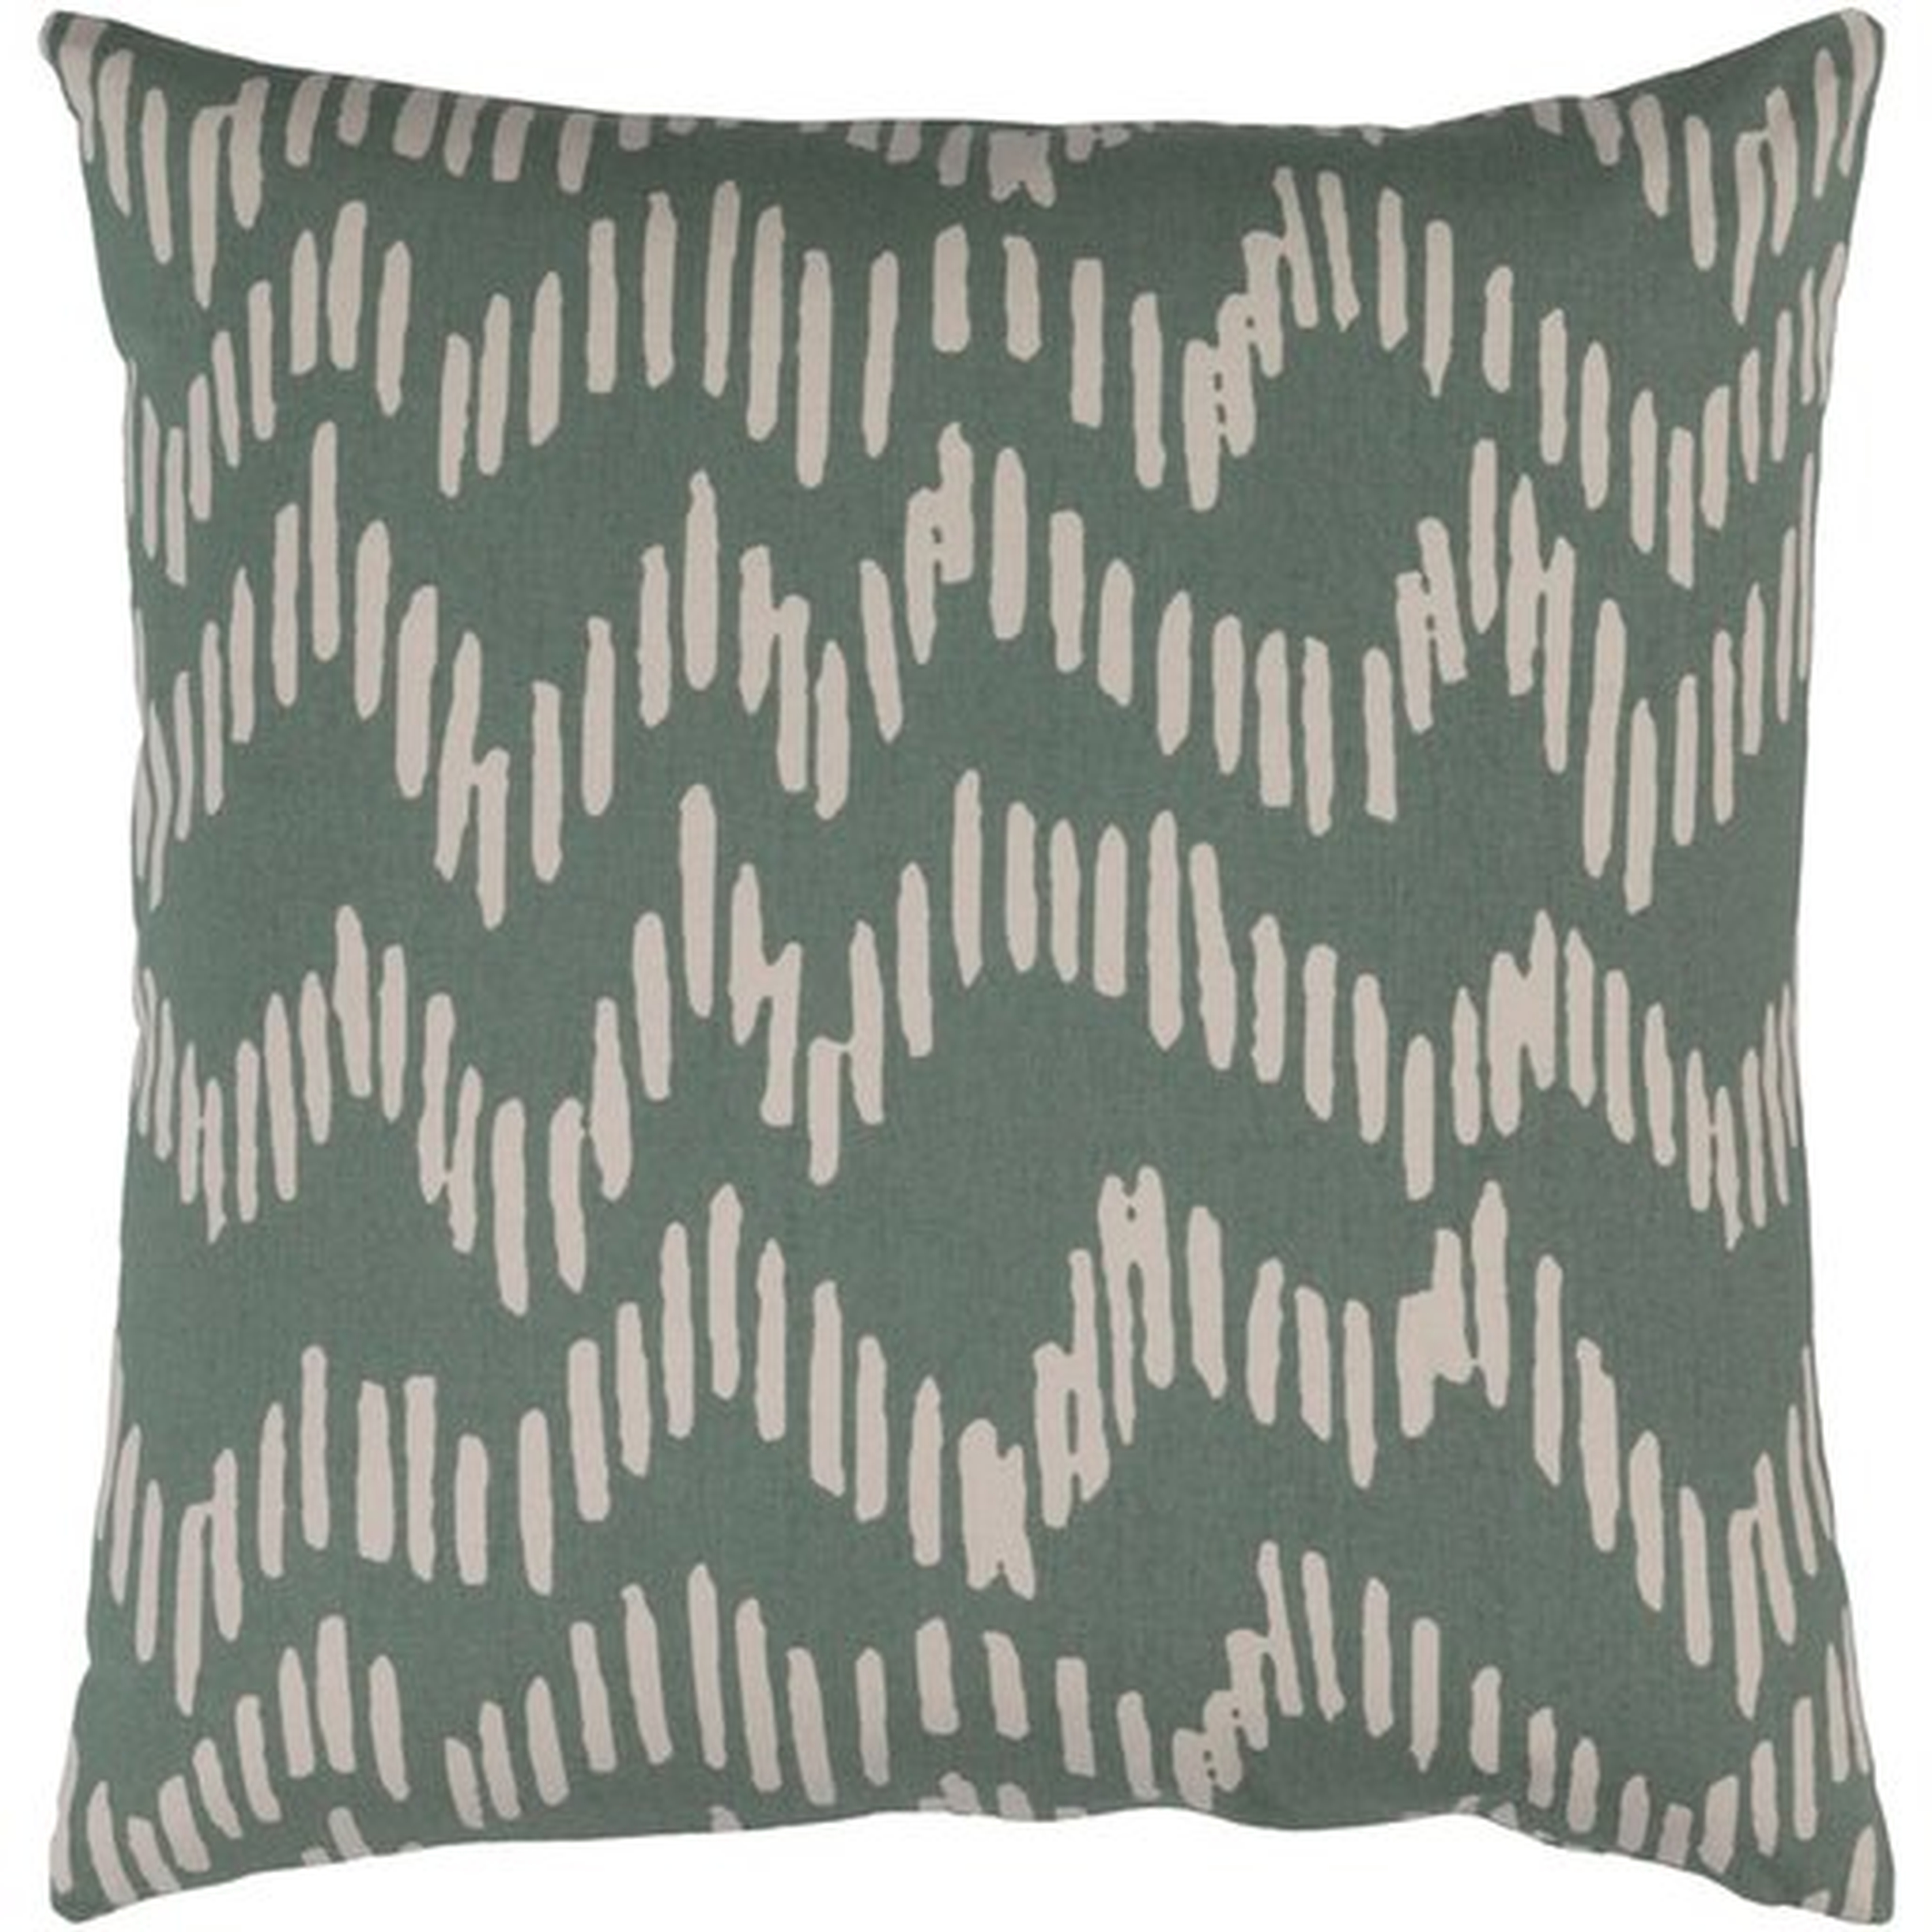 Somerset Throw Pillow, 20" x 20", with down insert - Surya